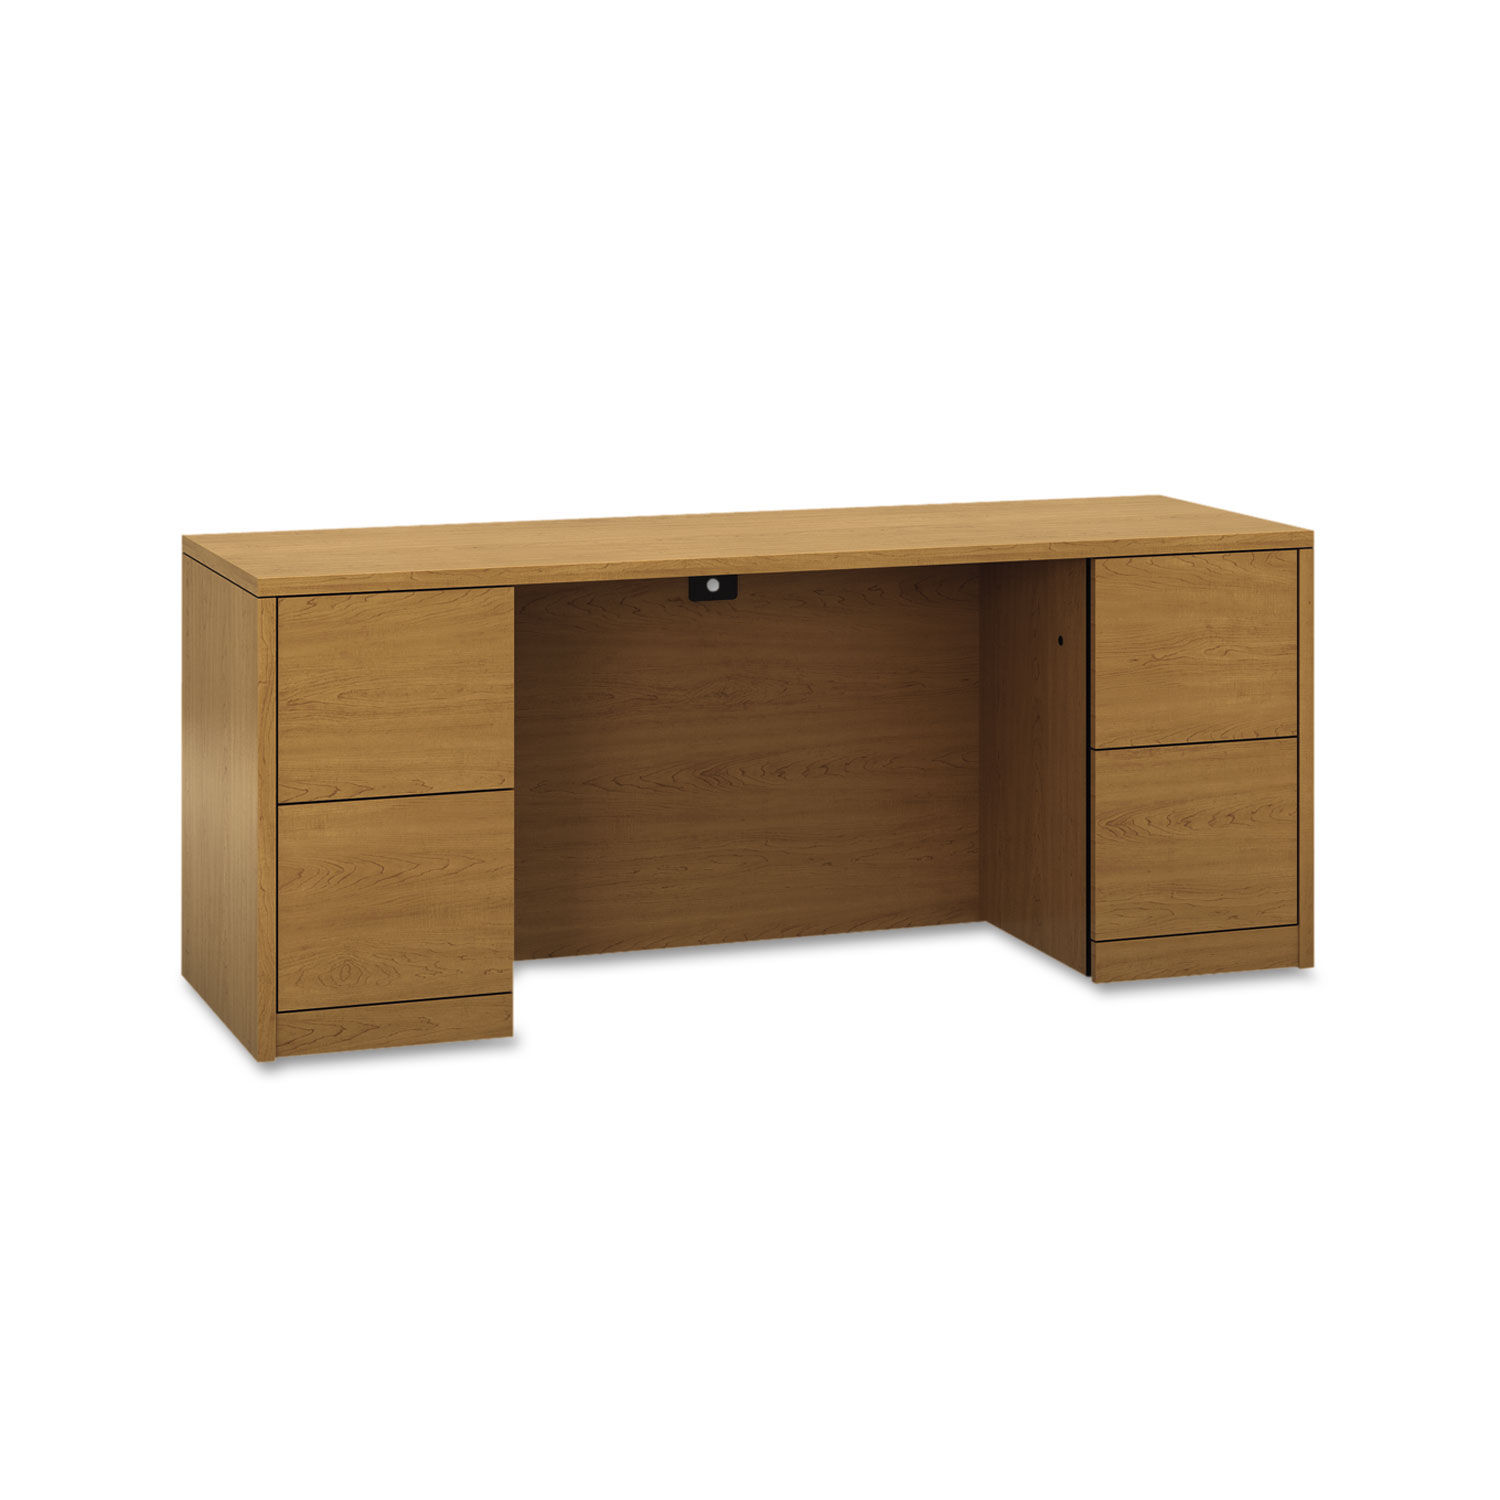 10500 Series Kneespace Credenza With Full-Height Pedestals 72w x 24d x 29.5h, Harvest